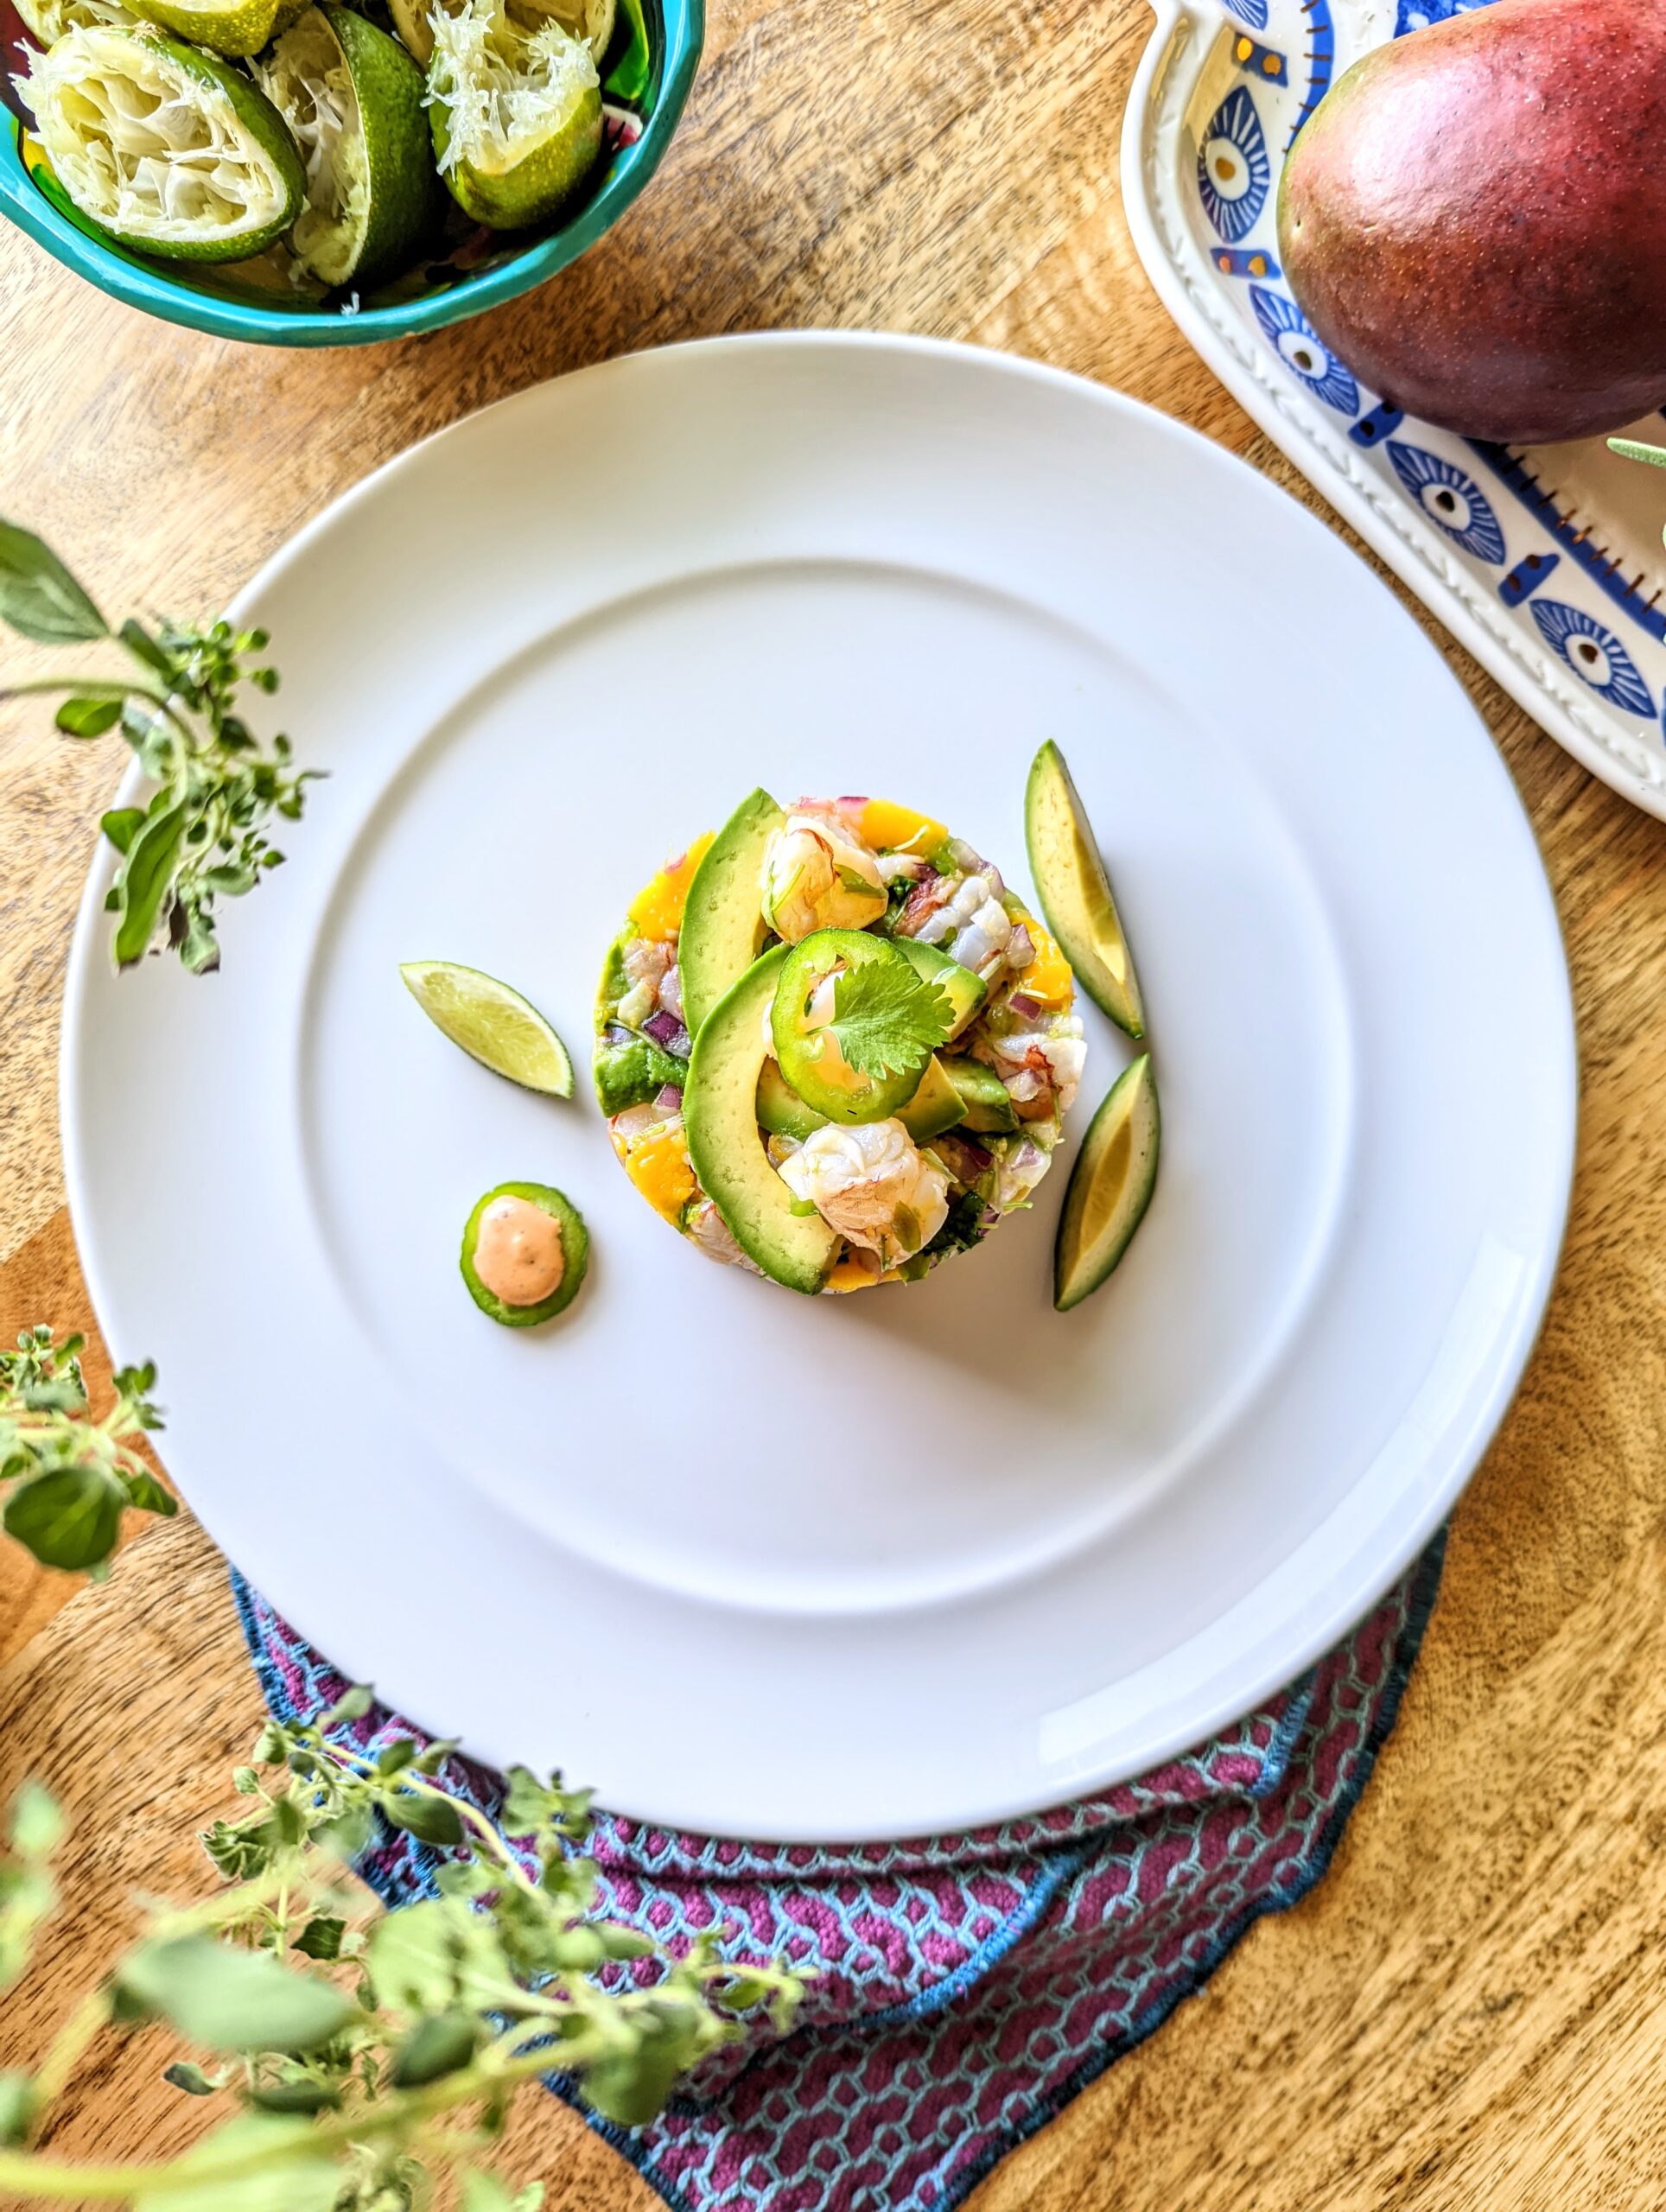 A aerial shot of circular shaped shrimp ceviche with mango and avocado. Two pieces of avocado flank the right side of the plate, and a lime wedge and jalapeno filled with an orange sauce flank the left. A purple and blue napkin cradles the bottom of the plate. Fresh oregano, juices limes, and a mango are visible in the corners of the photo.